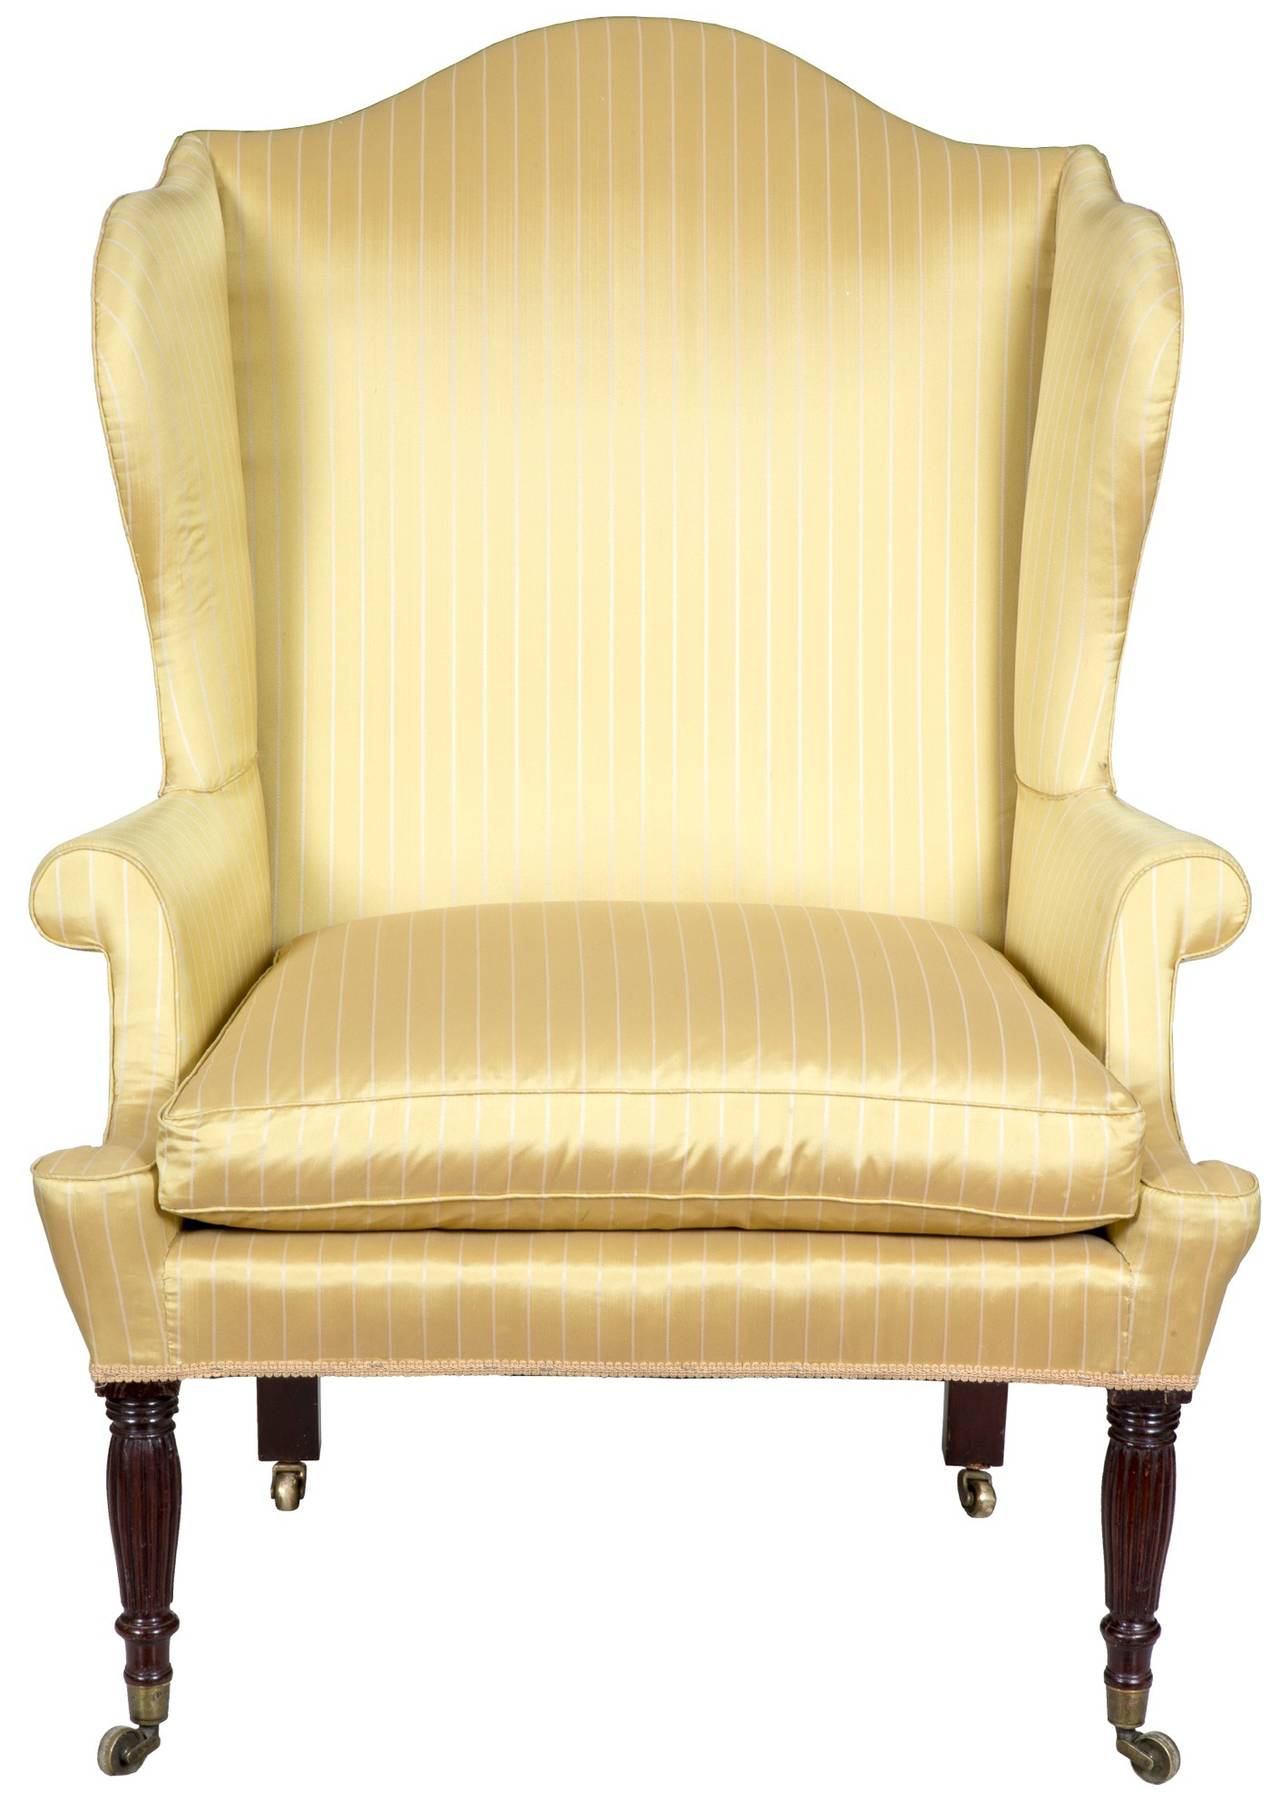 American Classical and Federal Wing Chair, Probably, New York, circa 1810-1820